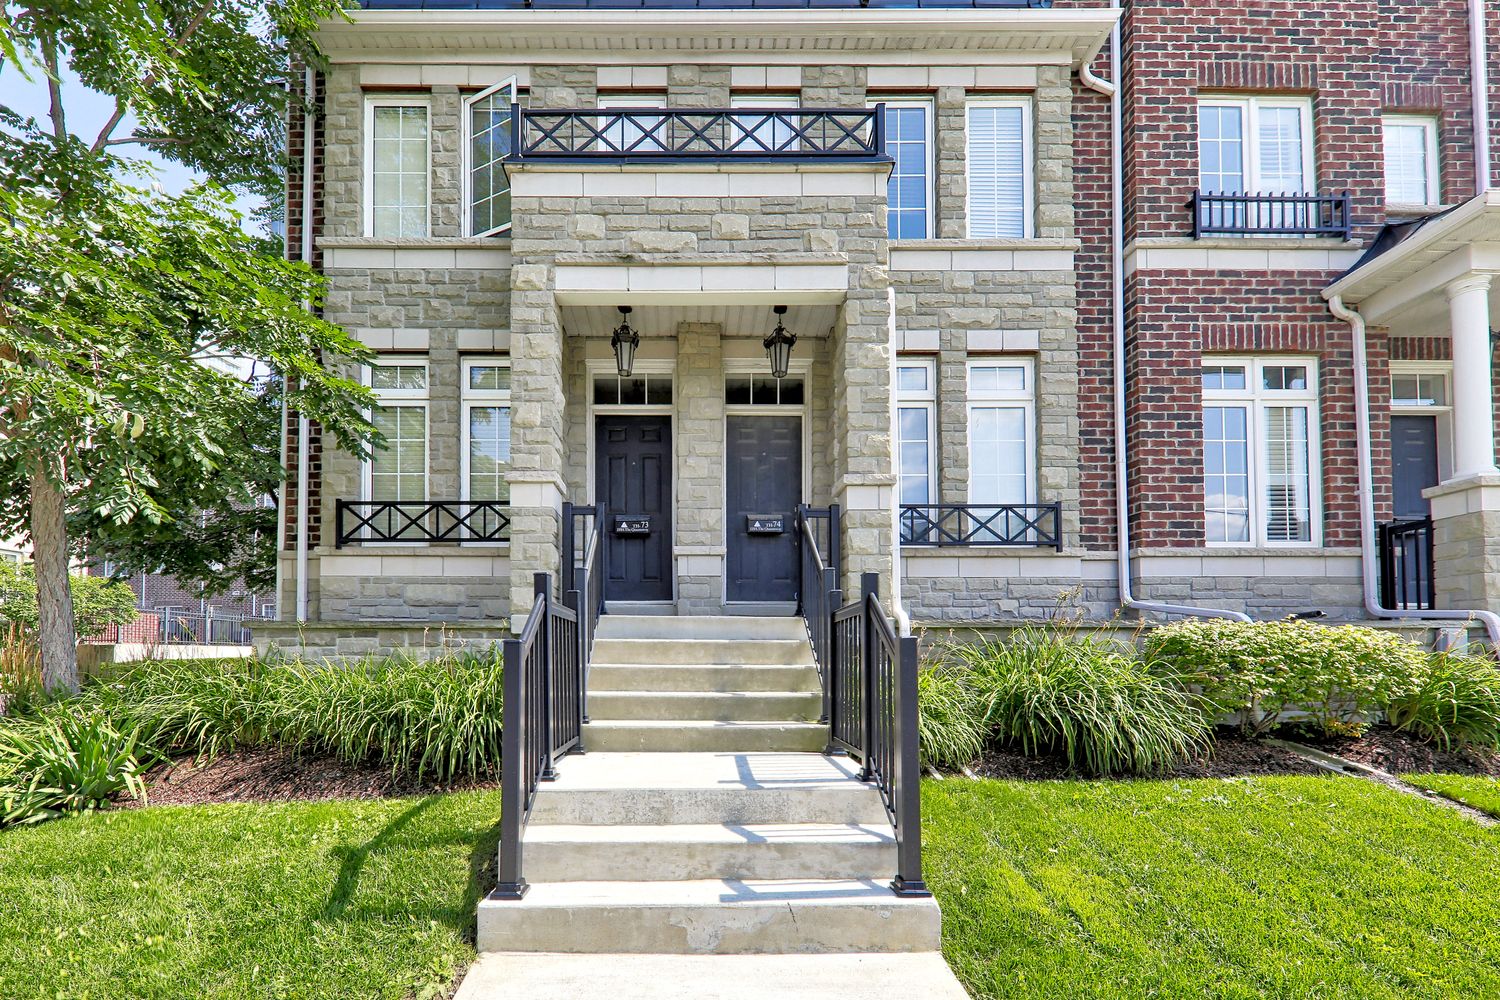 8 Windermere Avenue. Windermere by The Lake Townhomes is located in  West End, Toronto - image #4 of 4